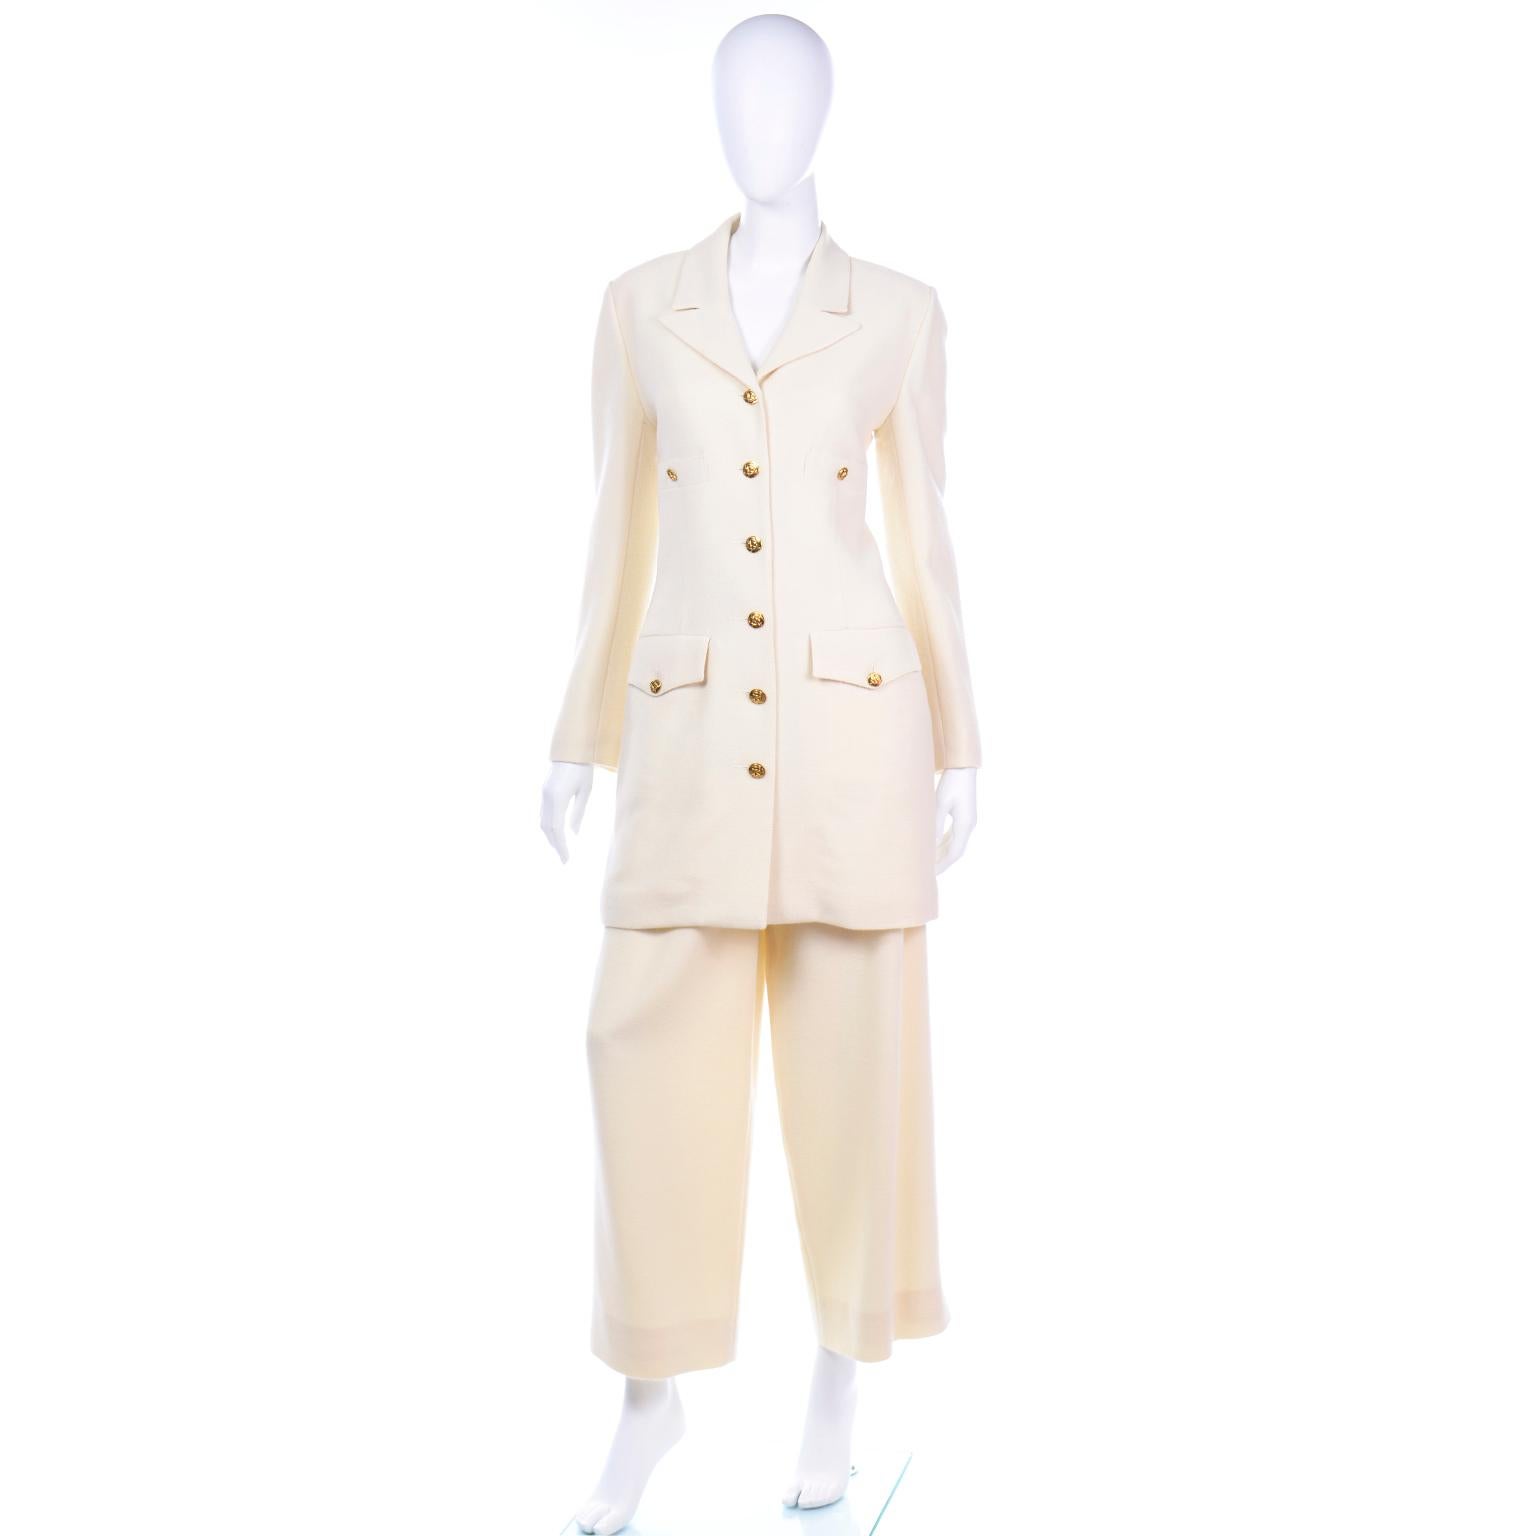 This is such a beautiful Sonia Rykiel creamy ivory textured wool suit with a long line blazer and pleated wide leg trousers. The longline jacket has two functional buttoned breasted pockets and two flap pockets. The front of the jacket is secured